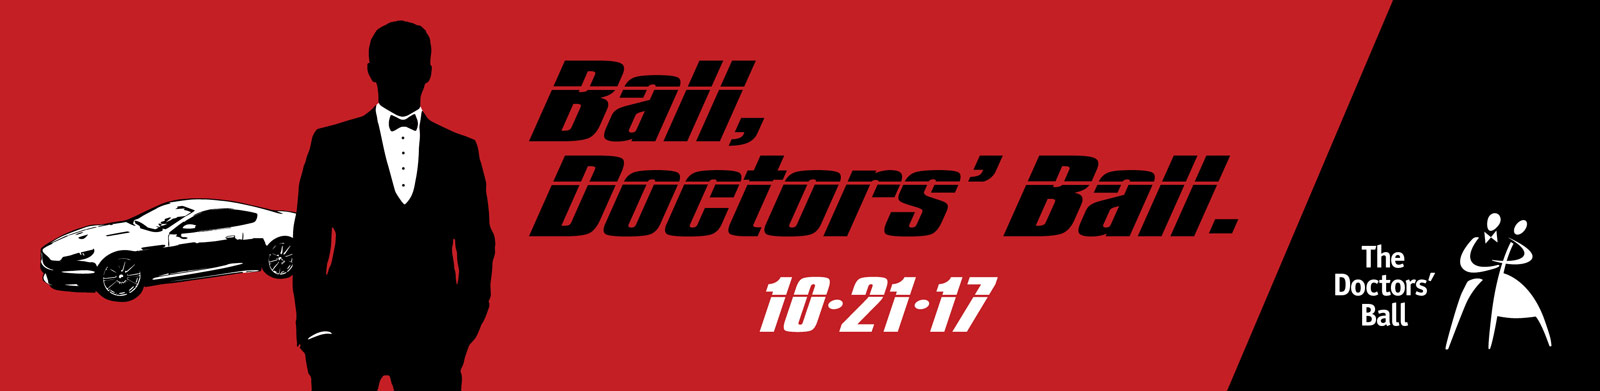 Current, retired UofL faculty to be honored at 22nd Annual Doctor’s Ball